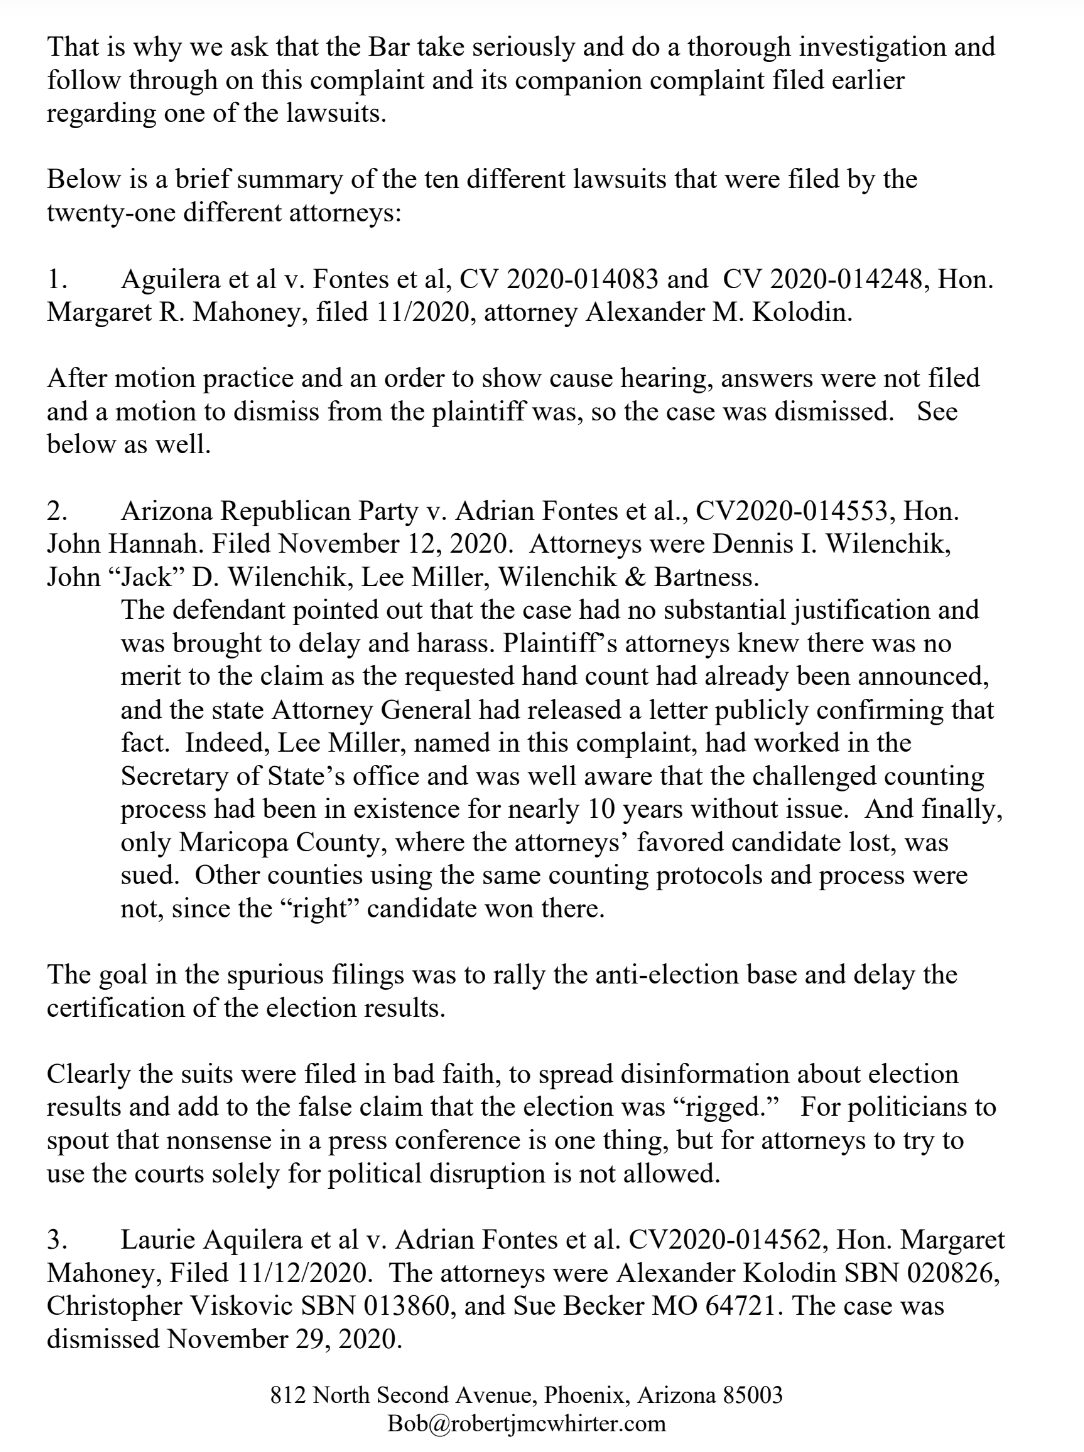 Screen-Shot-2020-12-20-at-9.21.08-AM Trump Lawyers Hit With Motion For Disbarment Over GOP Lawsuits Corruption Crime Featured Politics Top Stories 